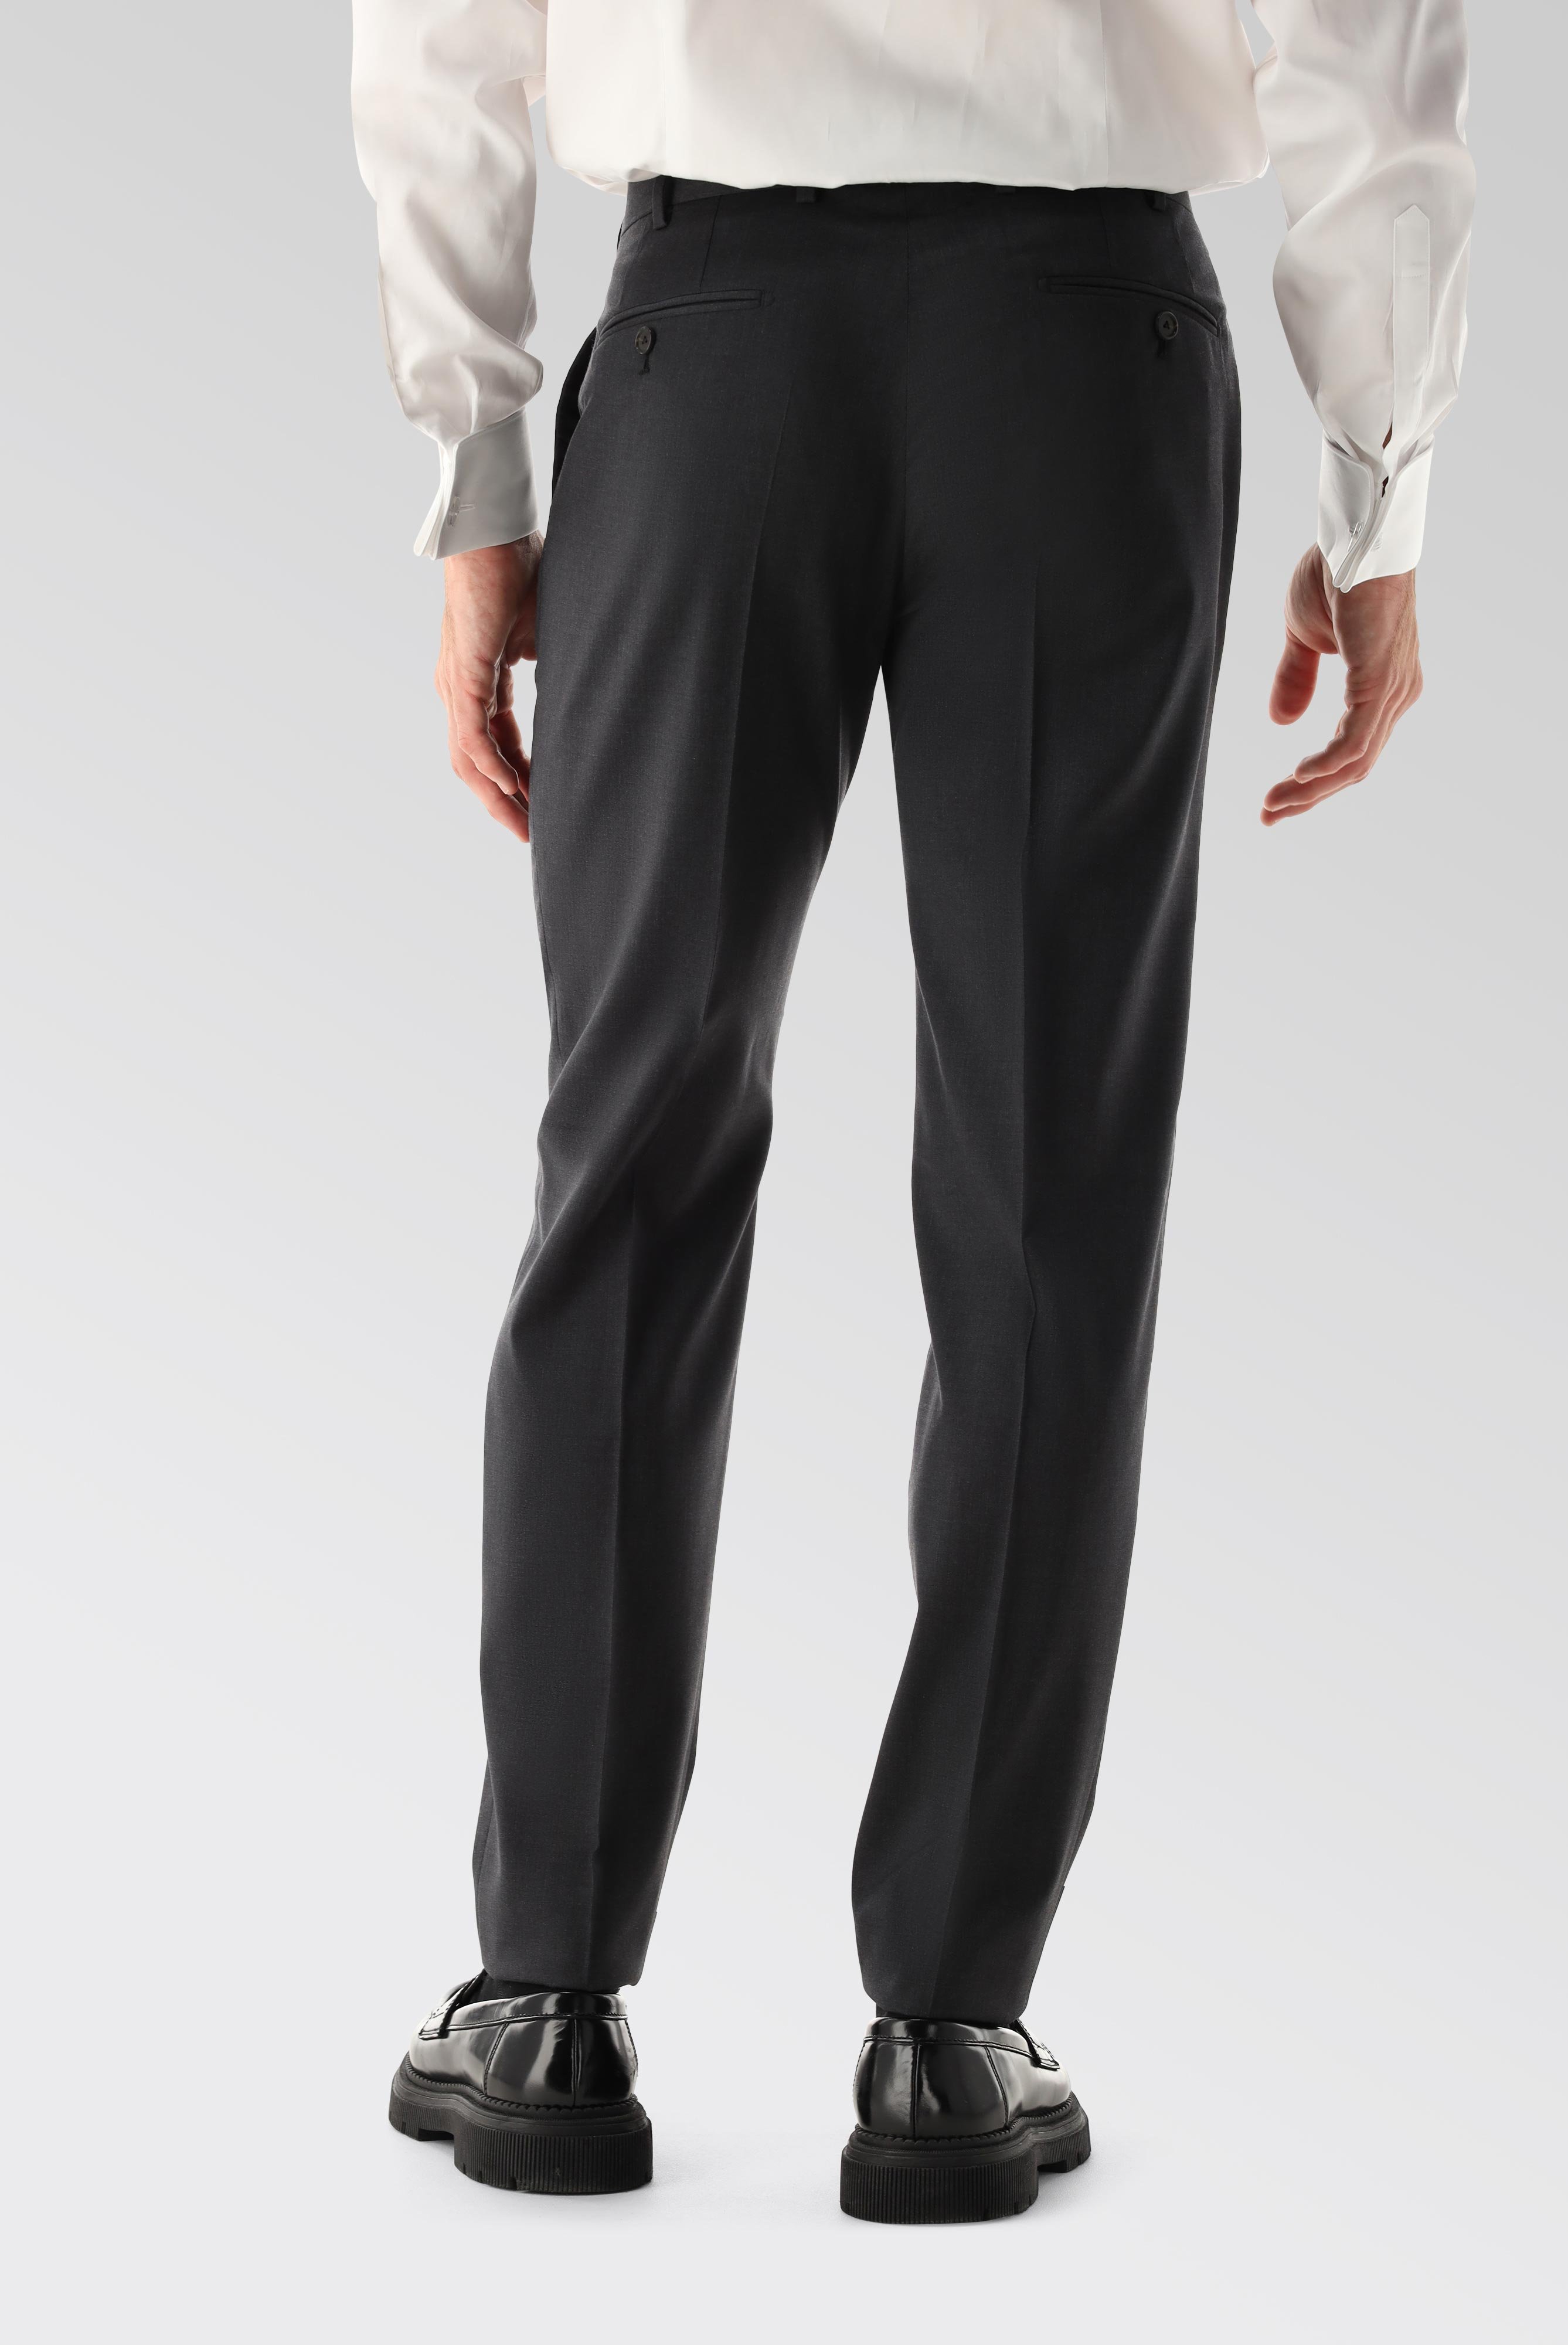 Jeans & Trousers+Wool Trousers Slim Fit+20.7880.16.H01010.090.50